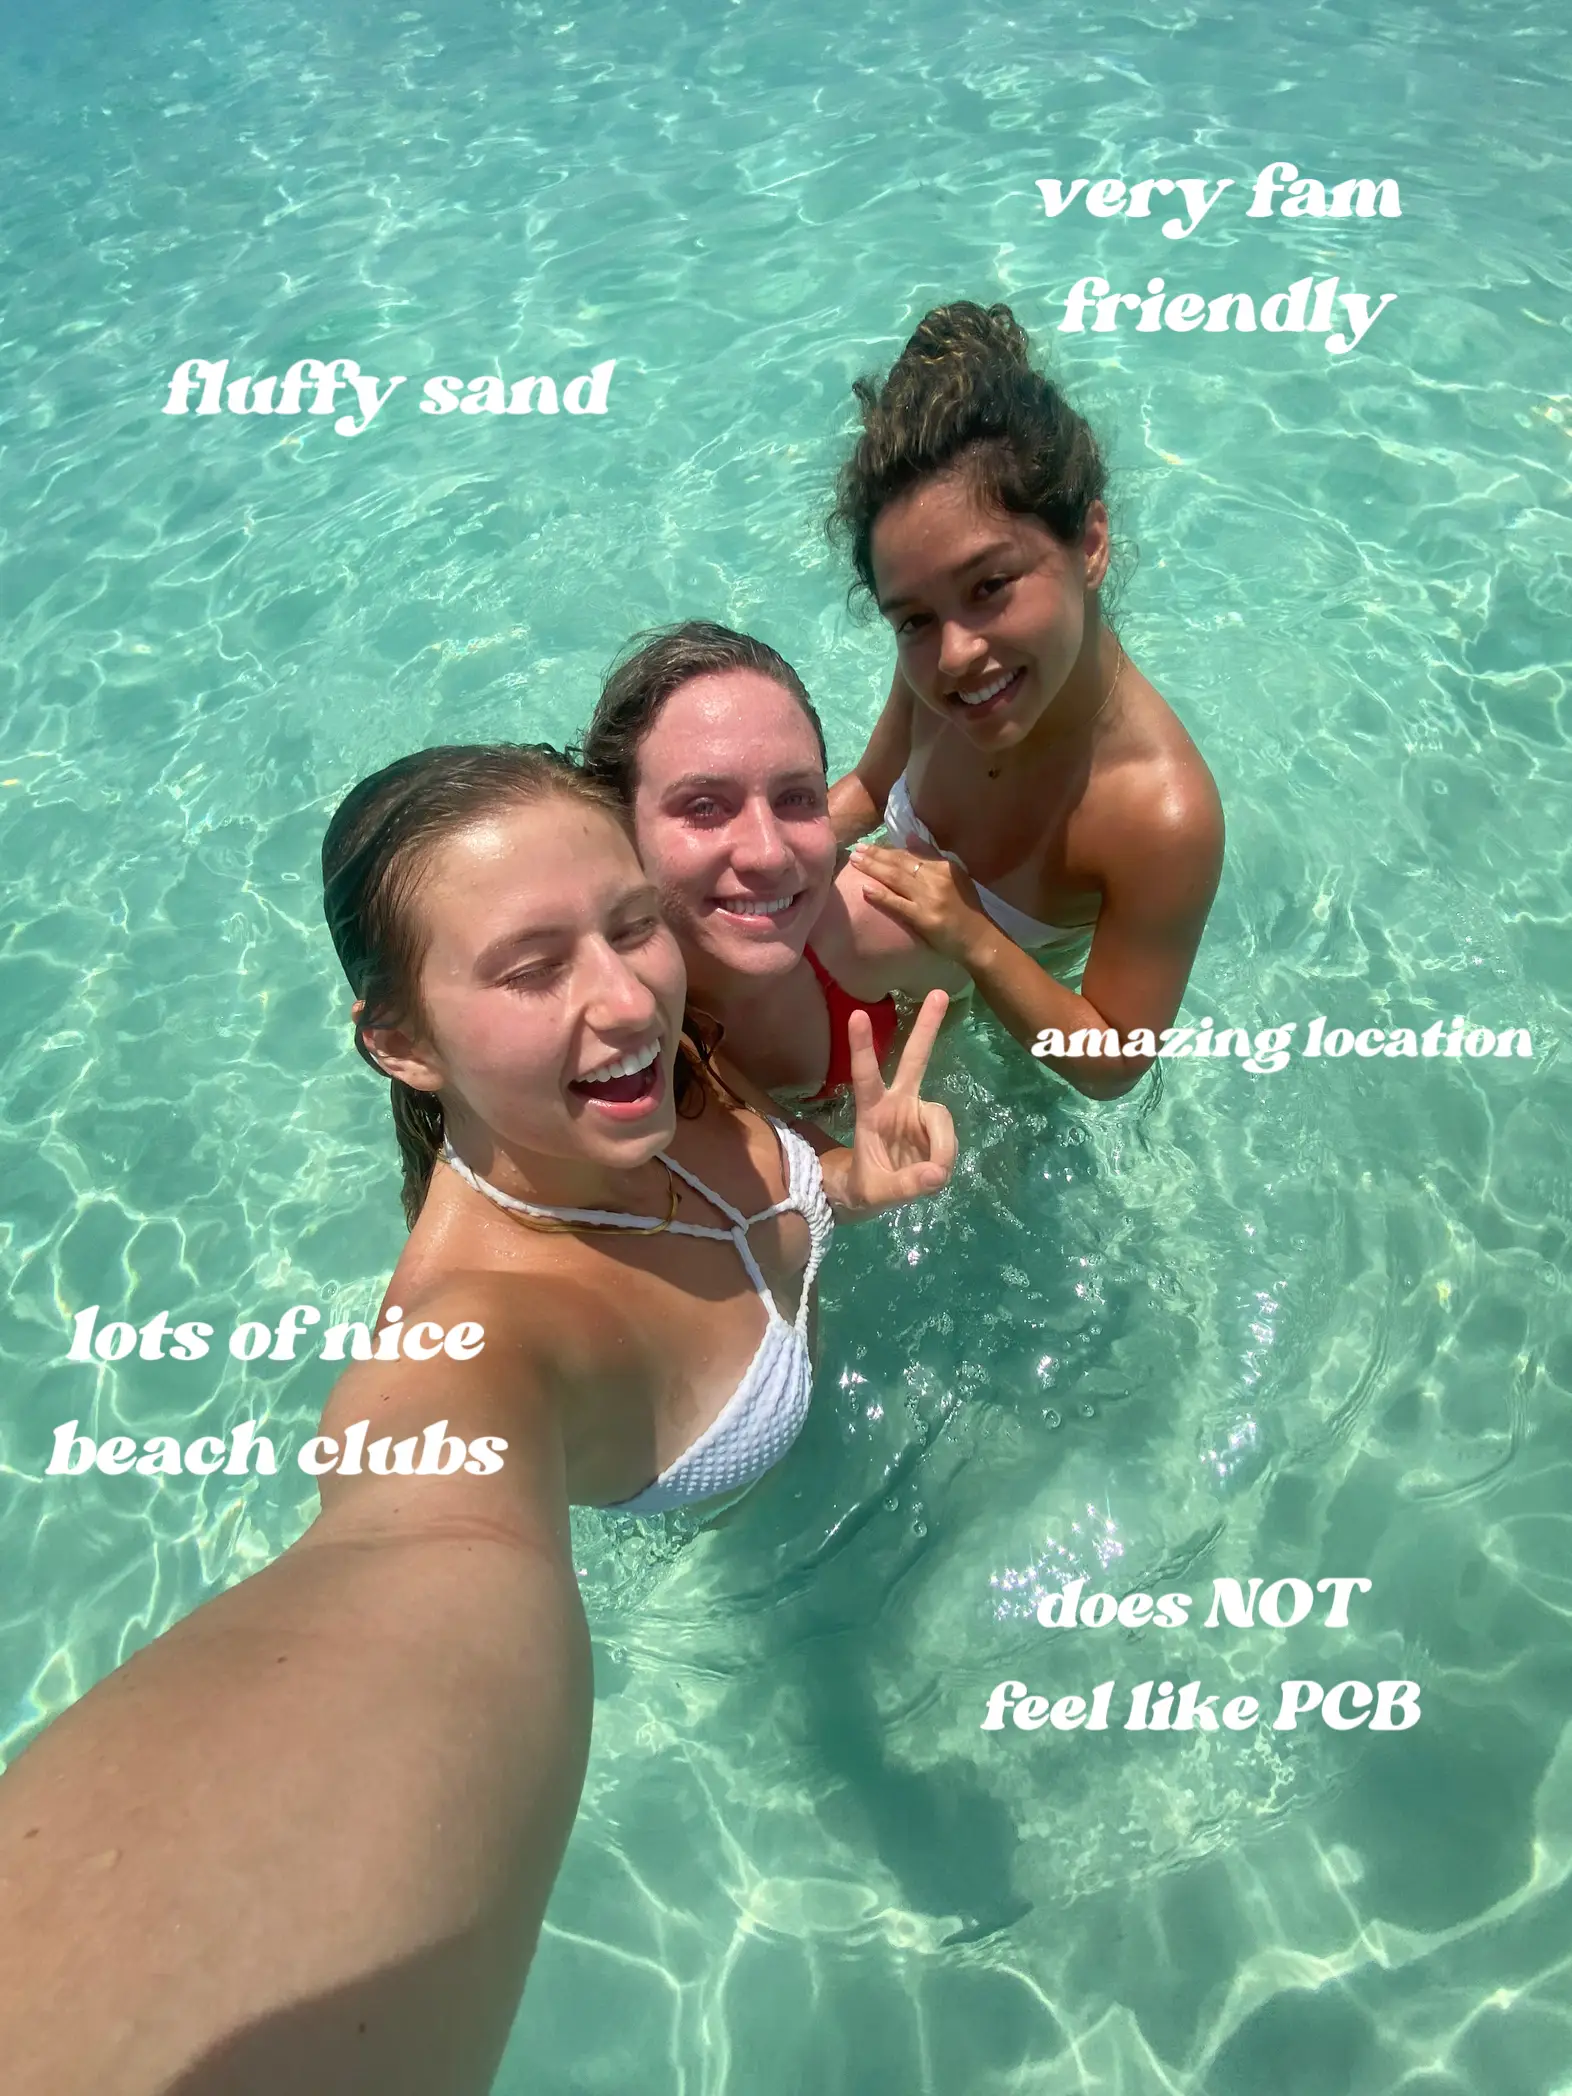  Three women are in a body of water, posing for a picture. The water is clear and blue, and they are all smiling.